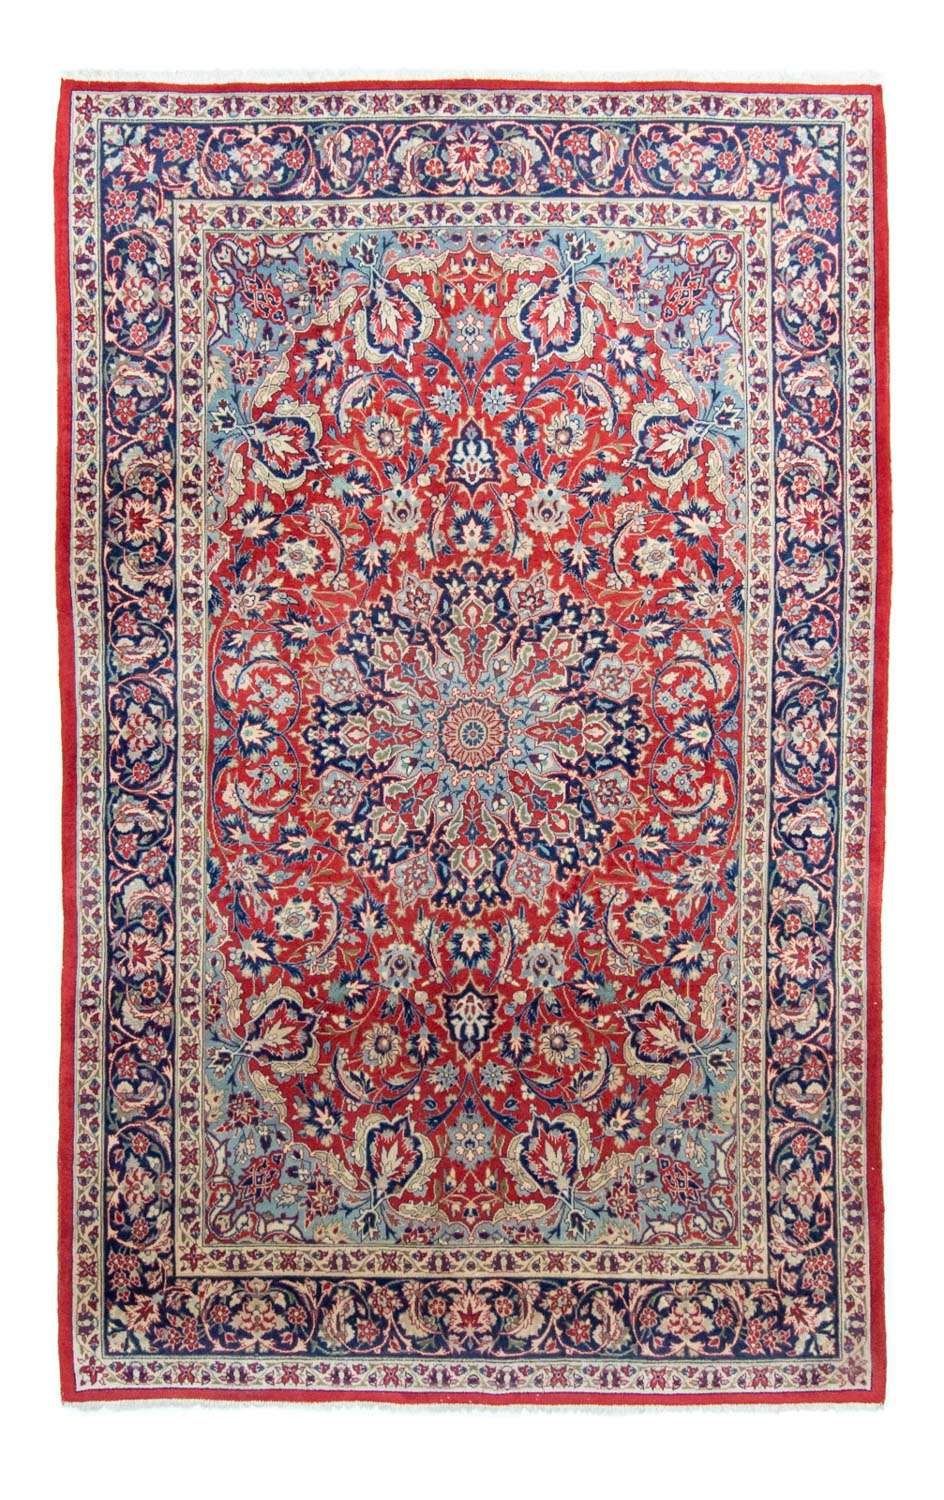 Perser Rug - Classic - 330 x 205 cm - red